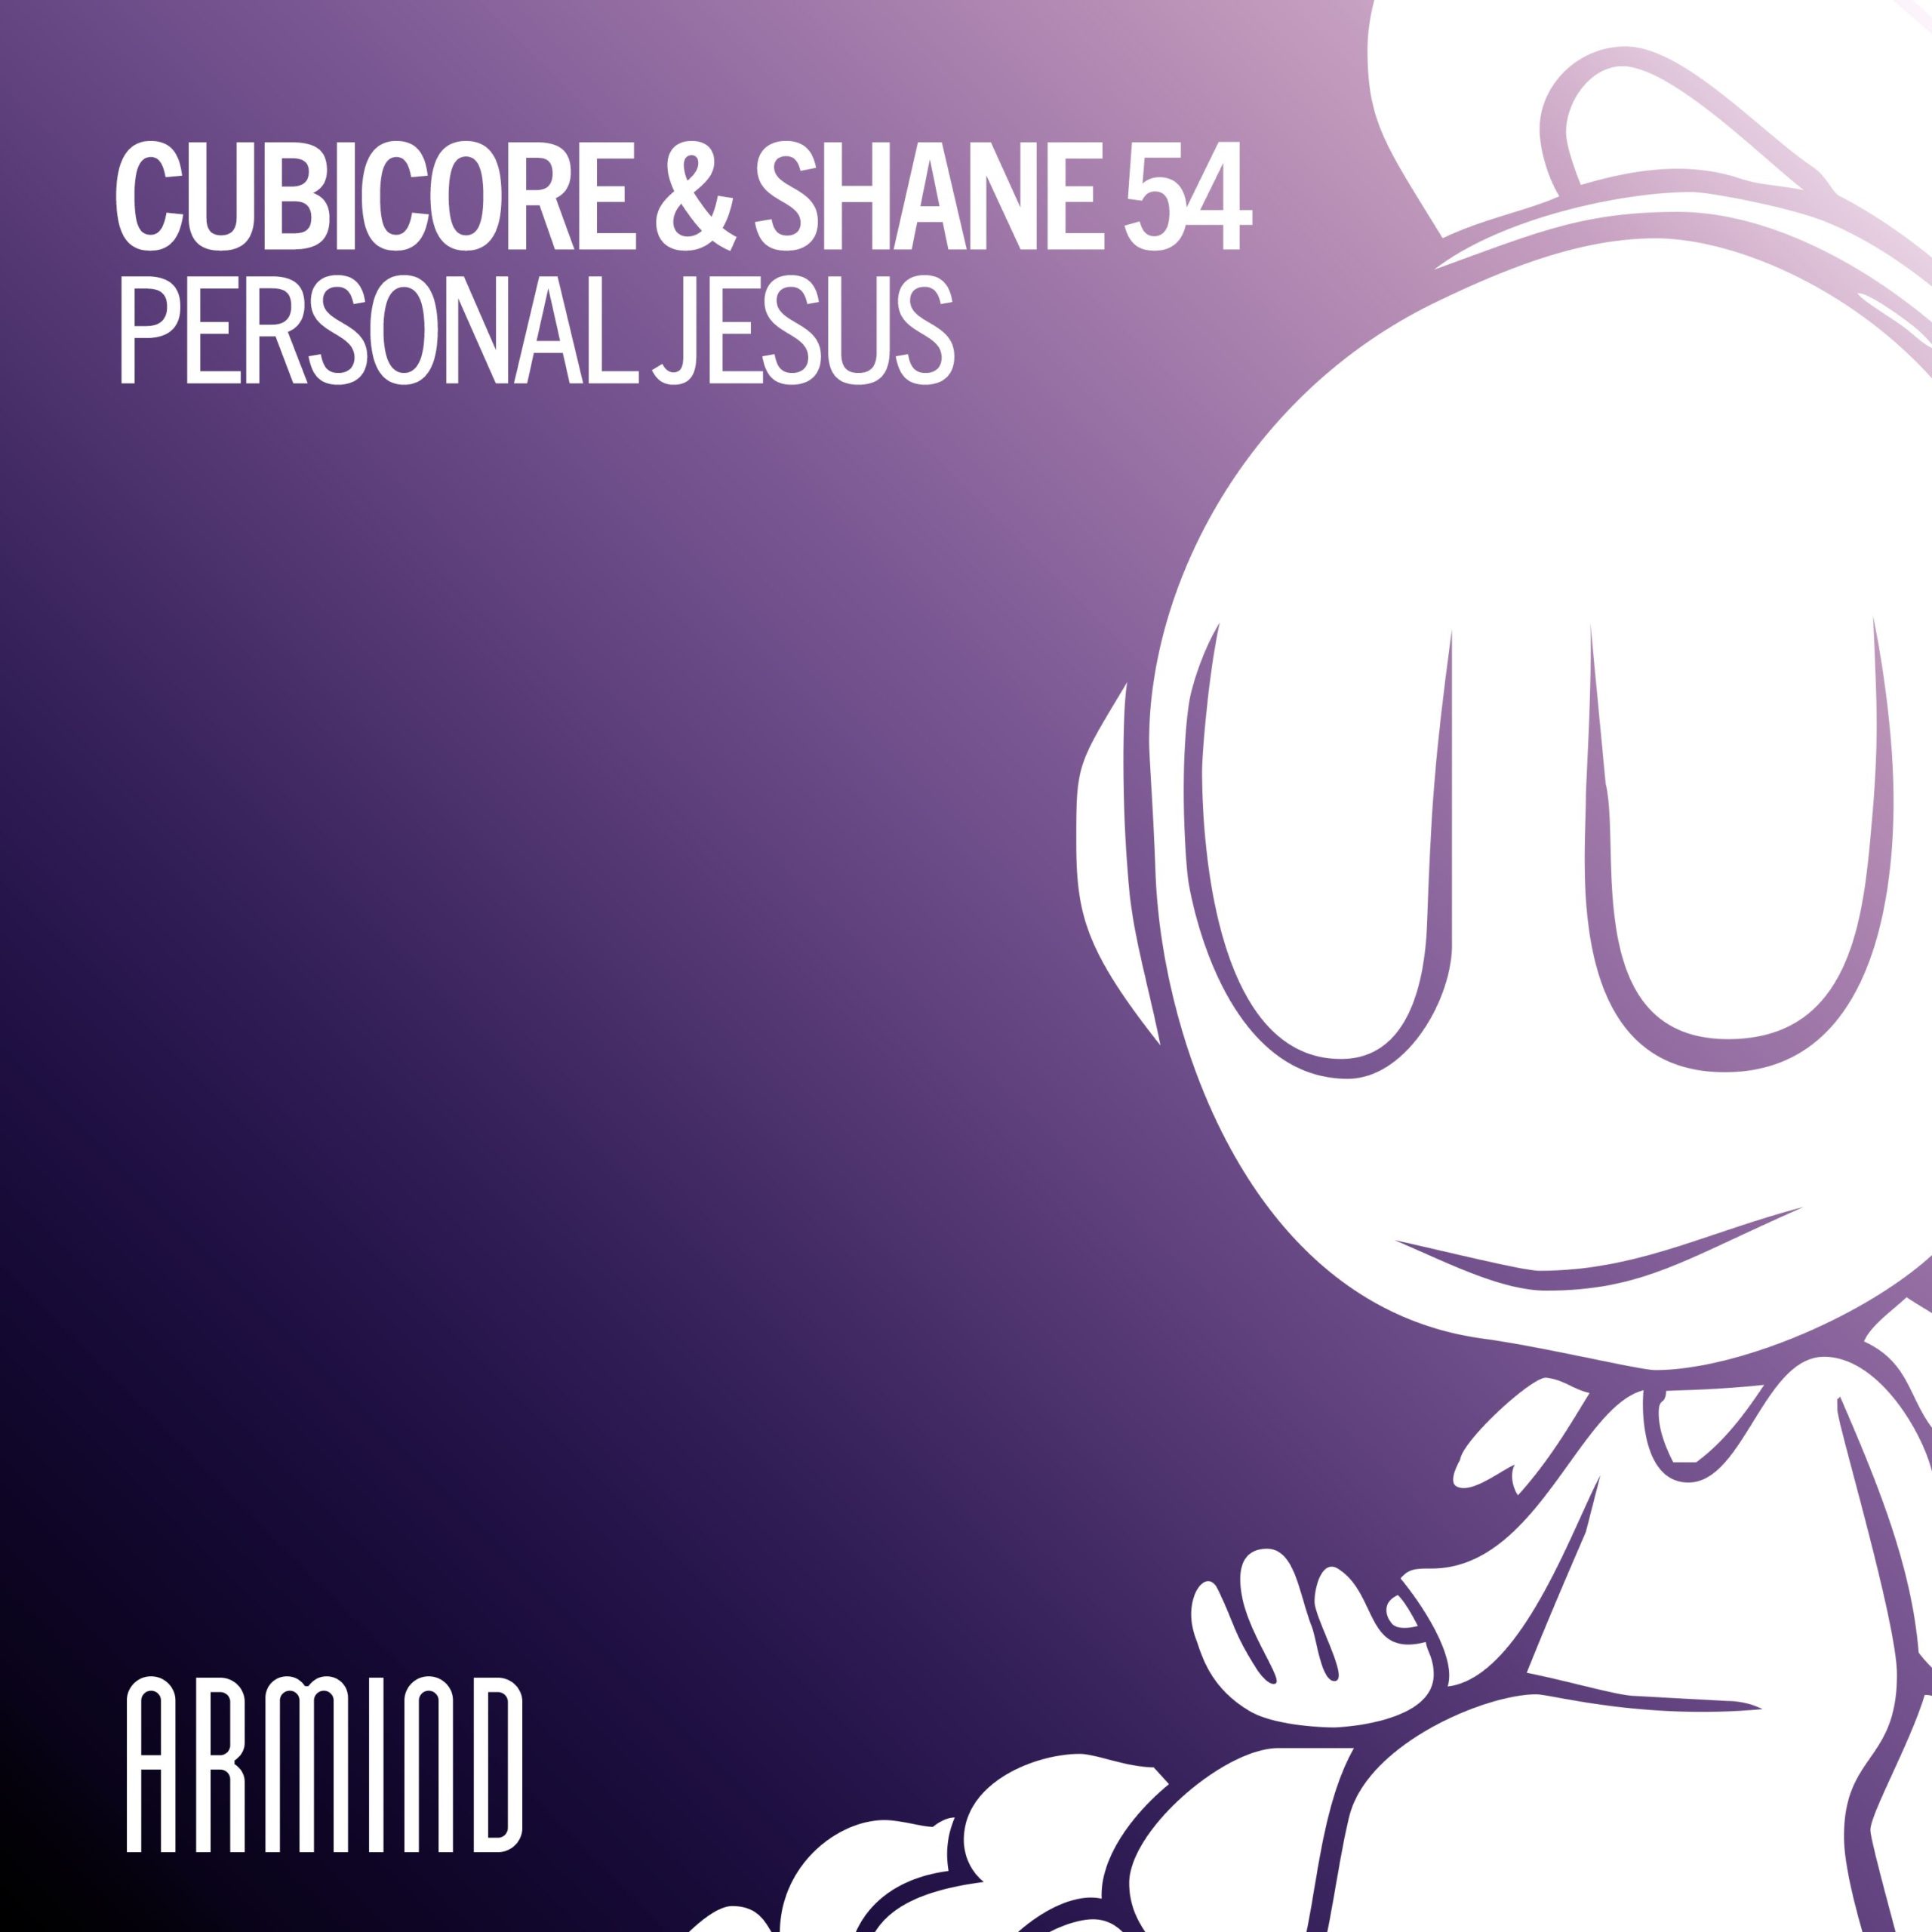 Cubicore and Shane54 presents Personal Jesus on Armind